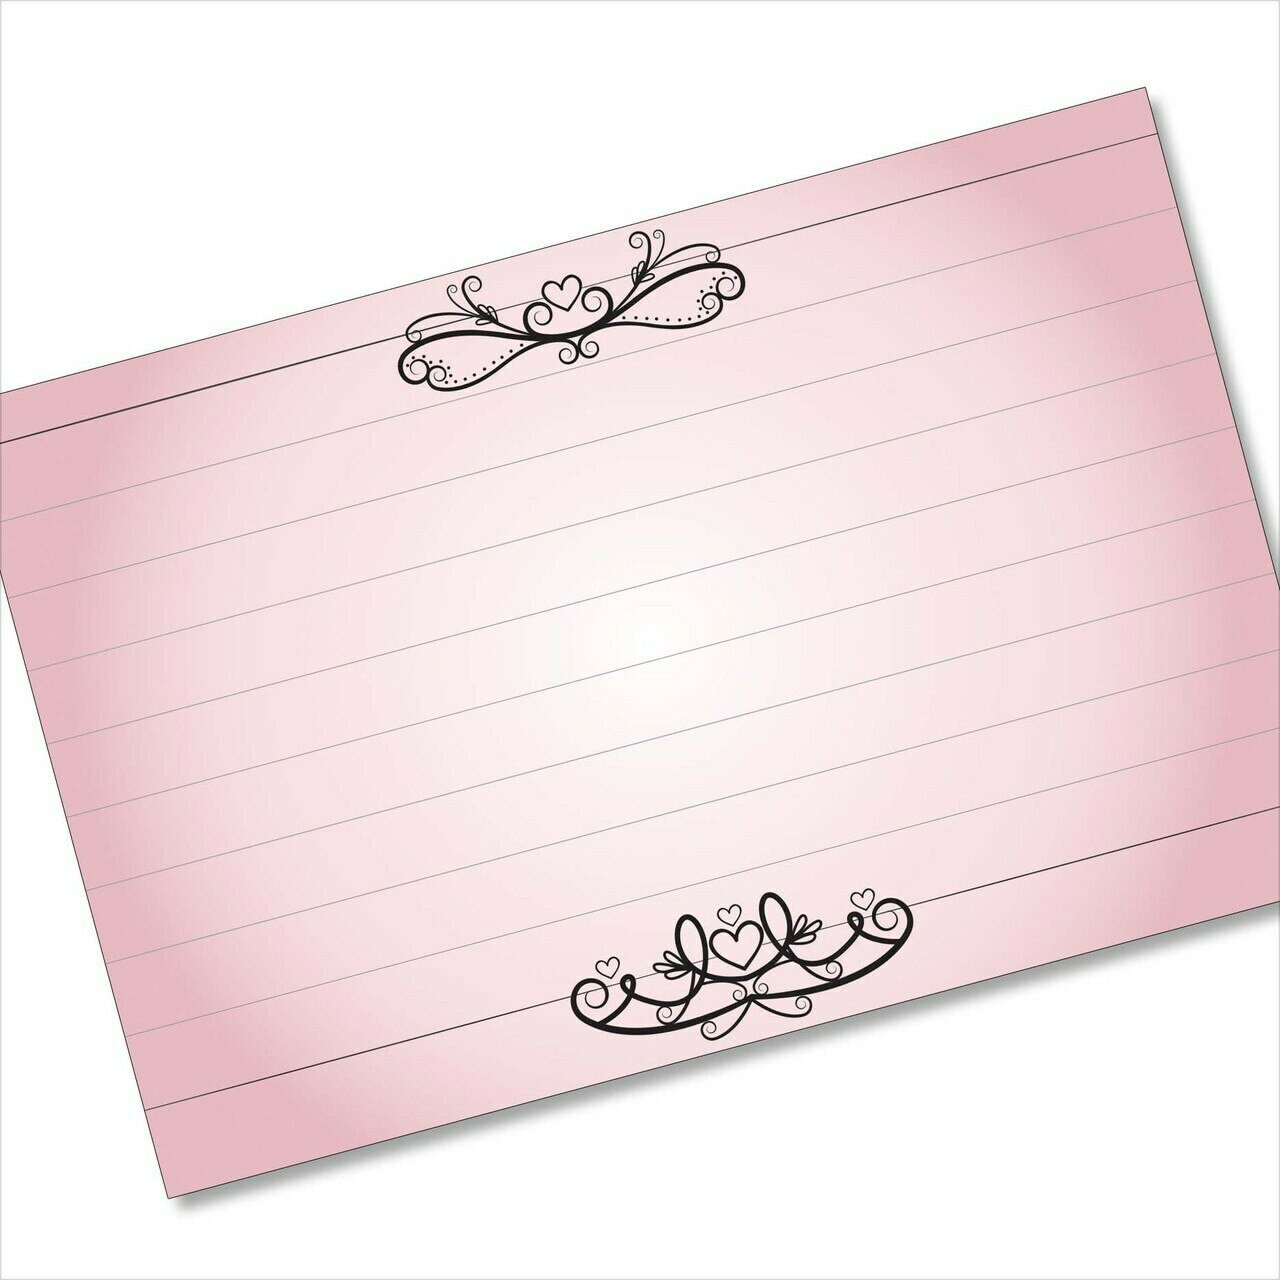 4x6 Recipe Card Hearts and Lines Pink Note Card or 40ea